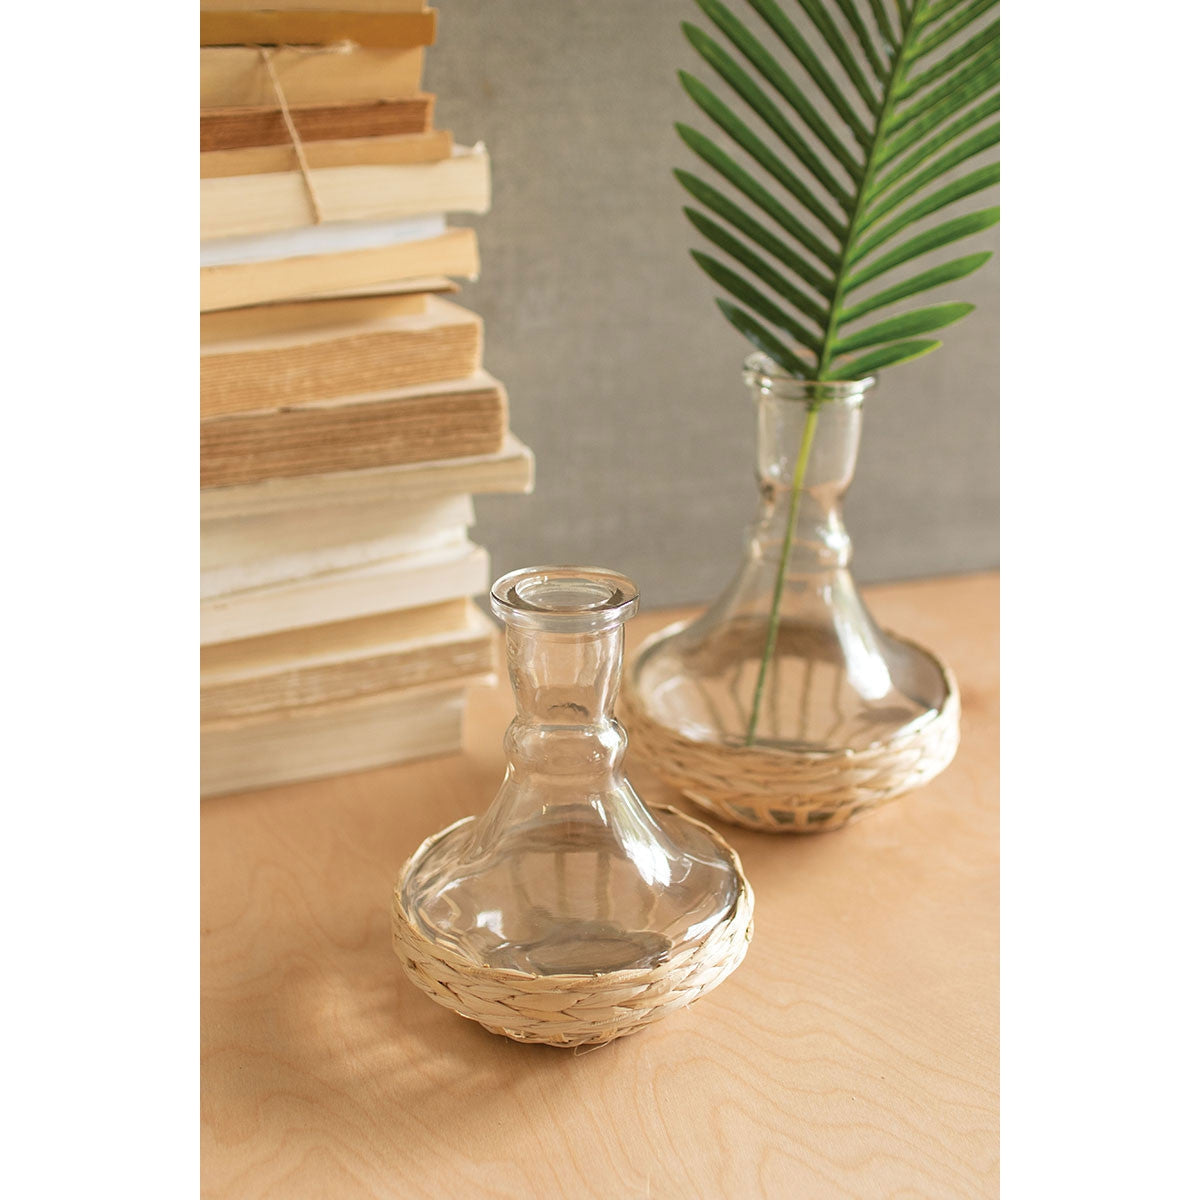 Seagrass Wrapped Vases